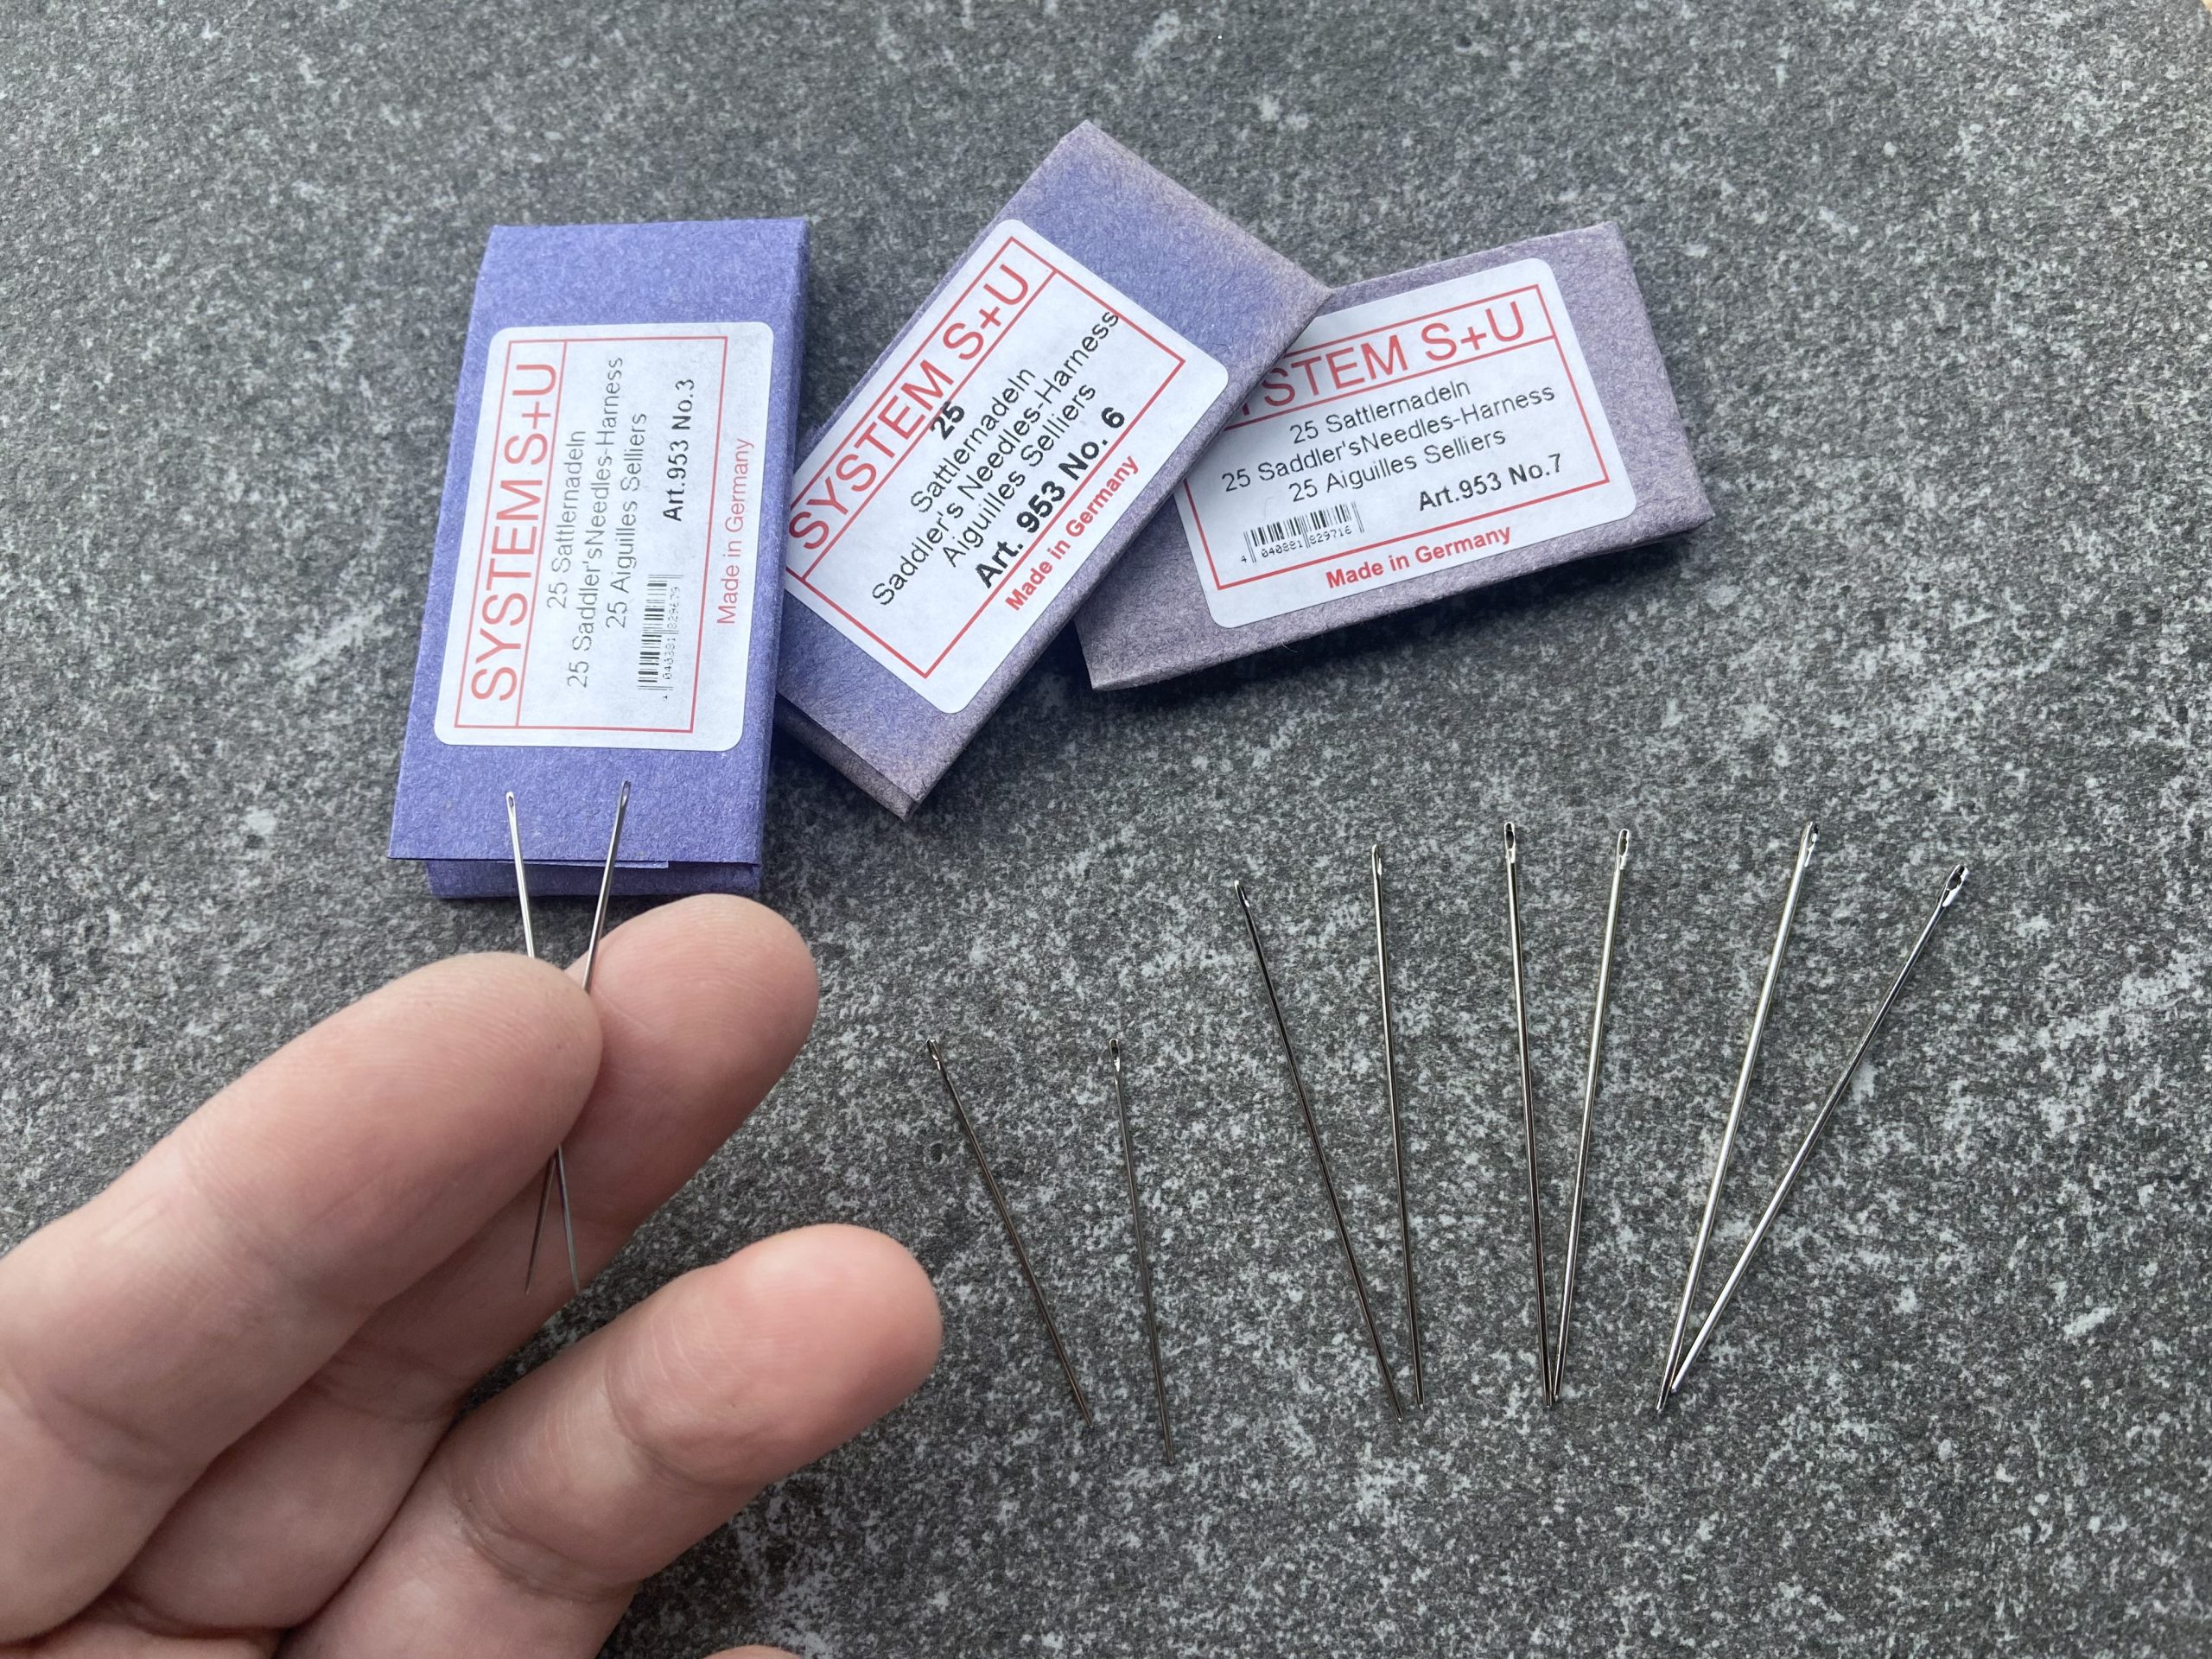 System S+U needles for hand sewing leath